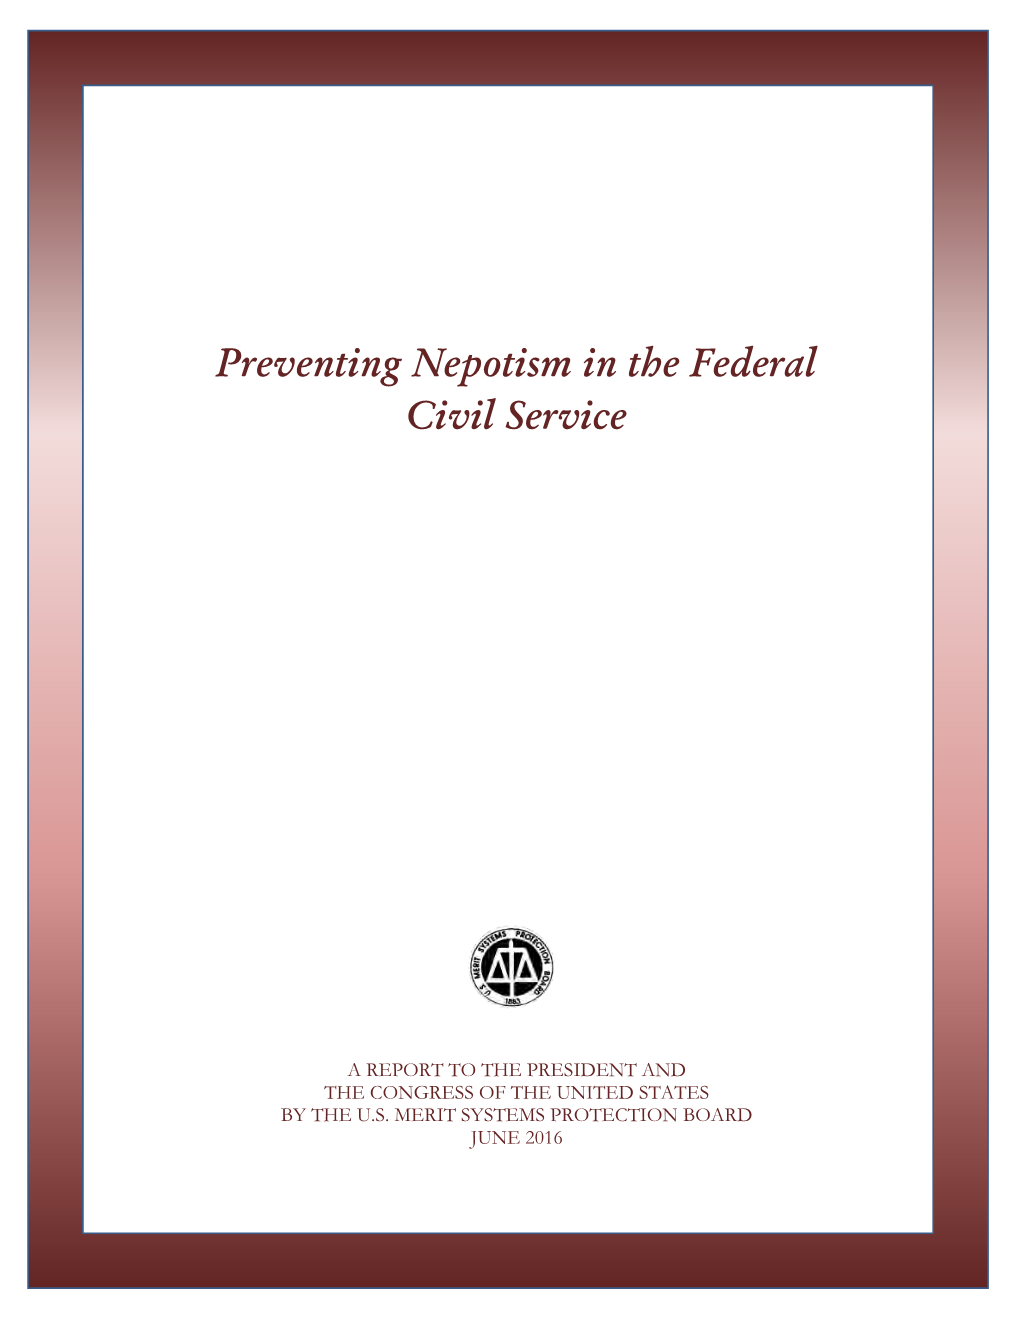 Preventing Nepotism in the Federal Civil Service Executive Summary